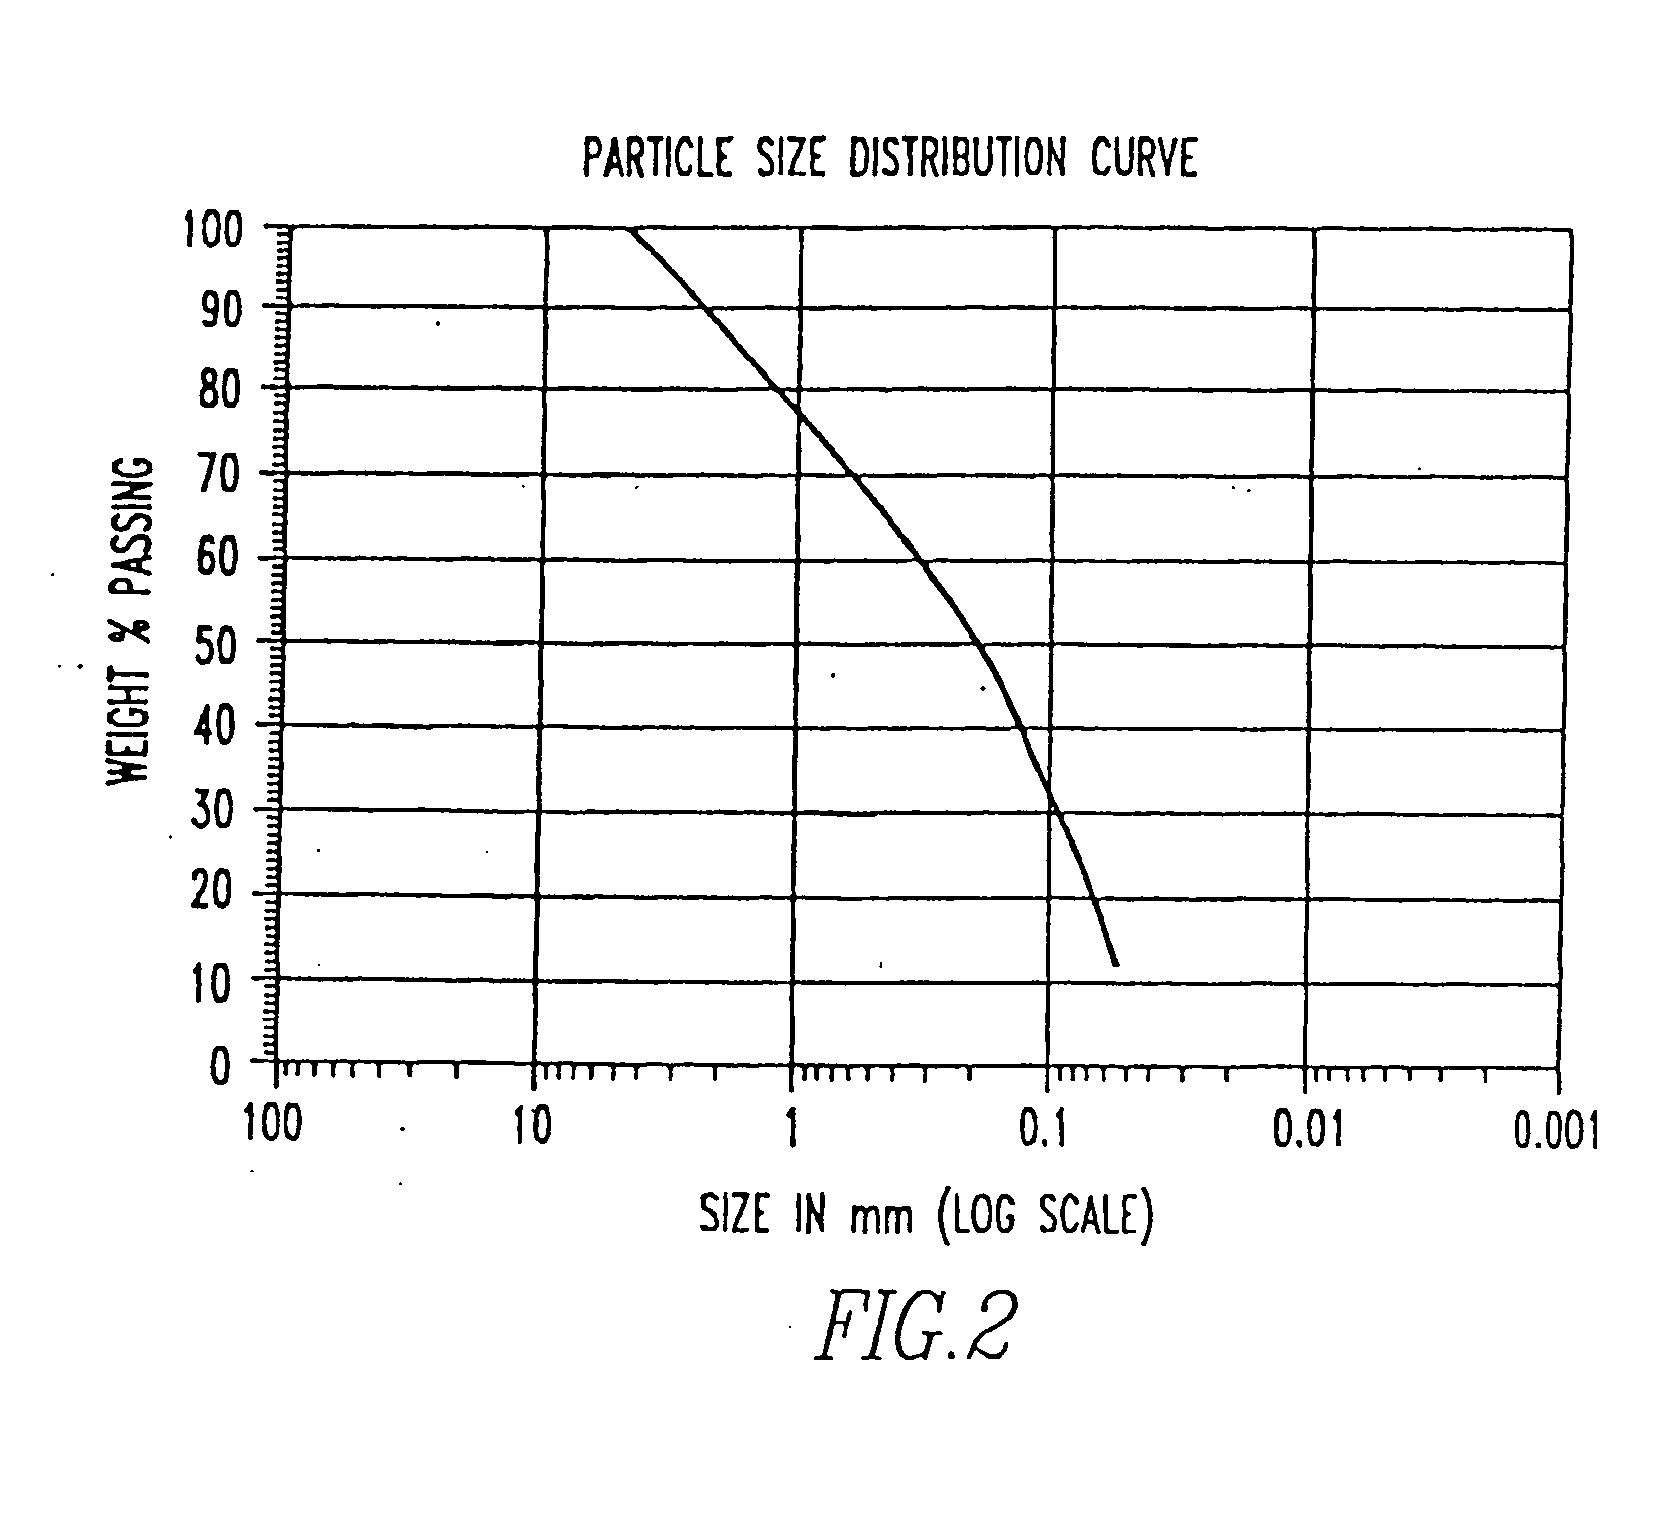 Method of chemical soil stabilization and dust control